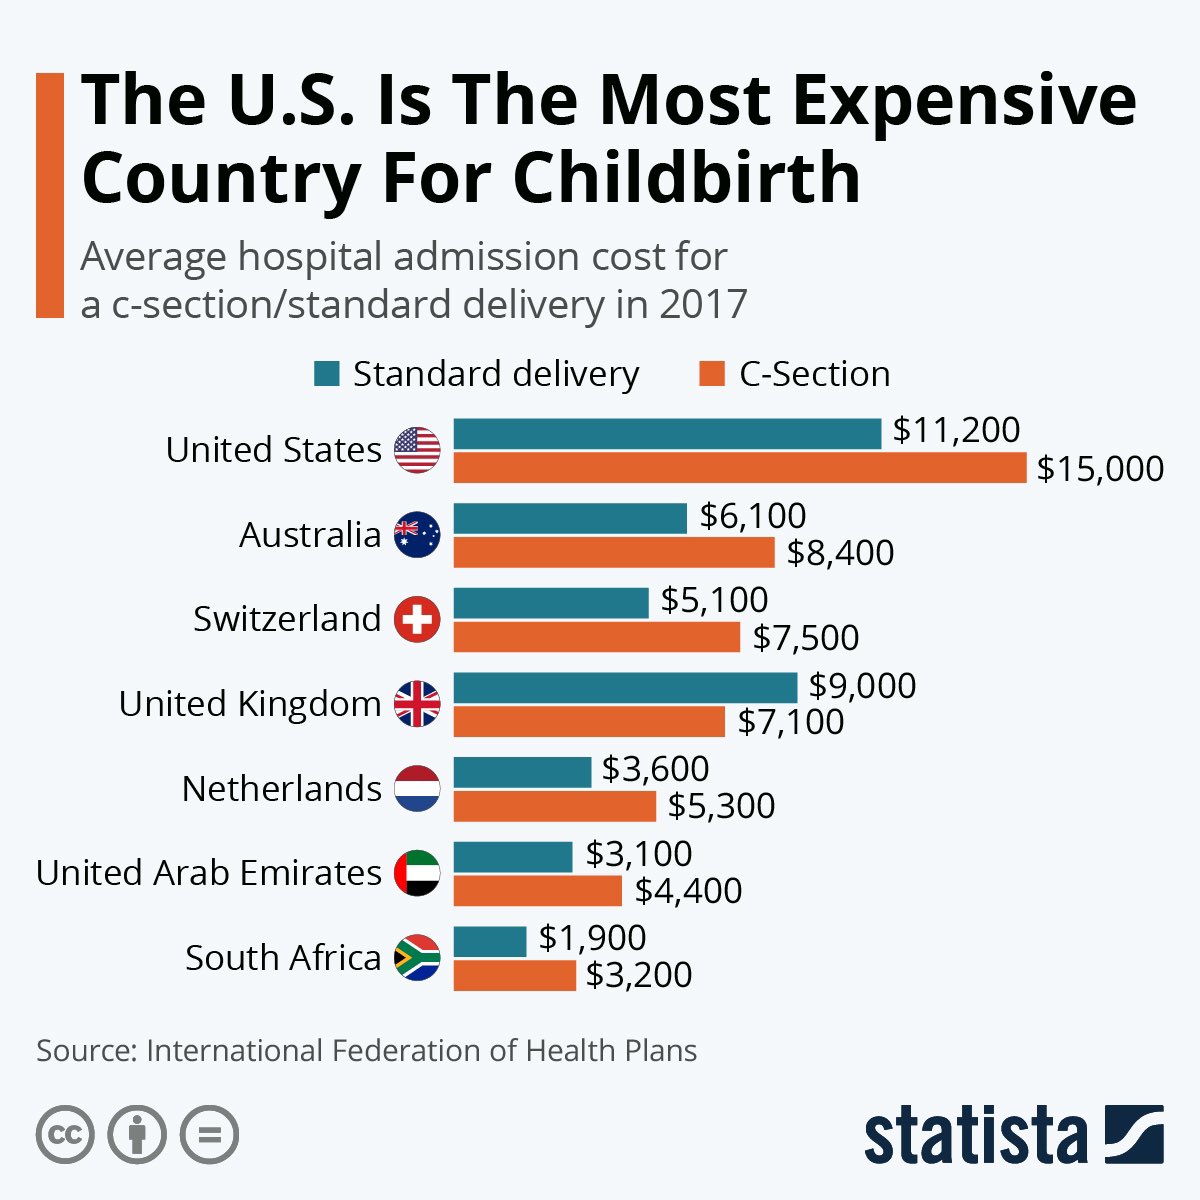 @IterIntellectus Nice bate. Obvious that you have no fucking clue what you’re talking about. It costs money just to give birth